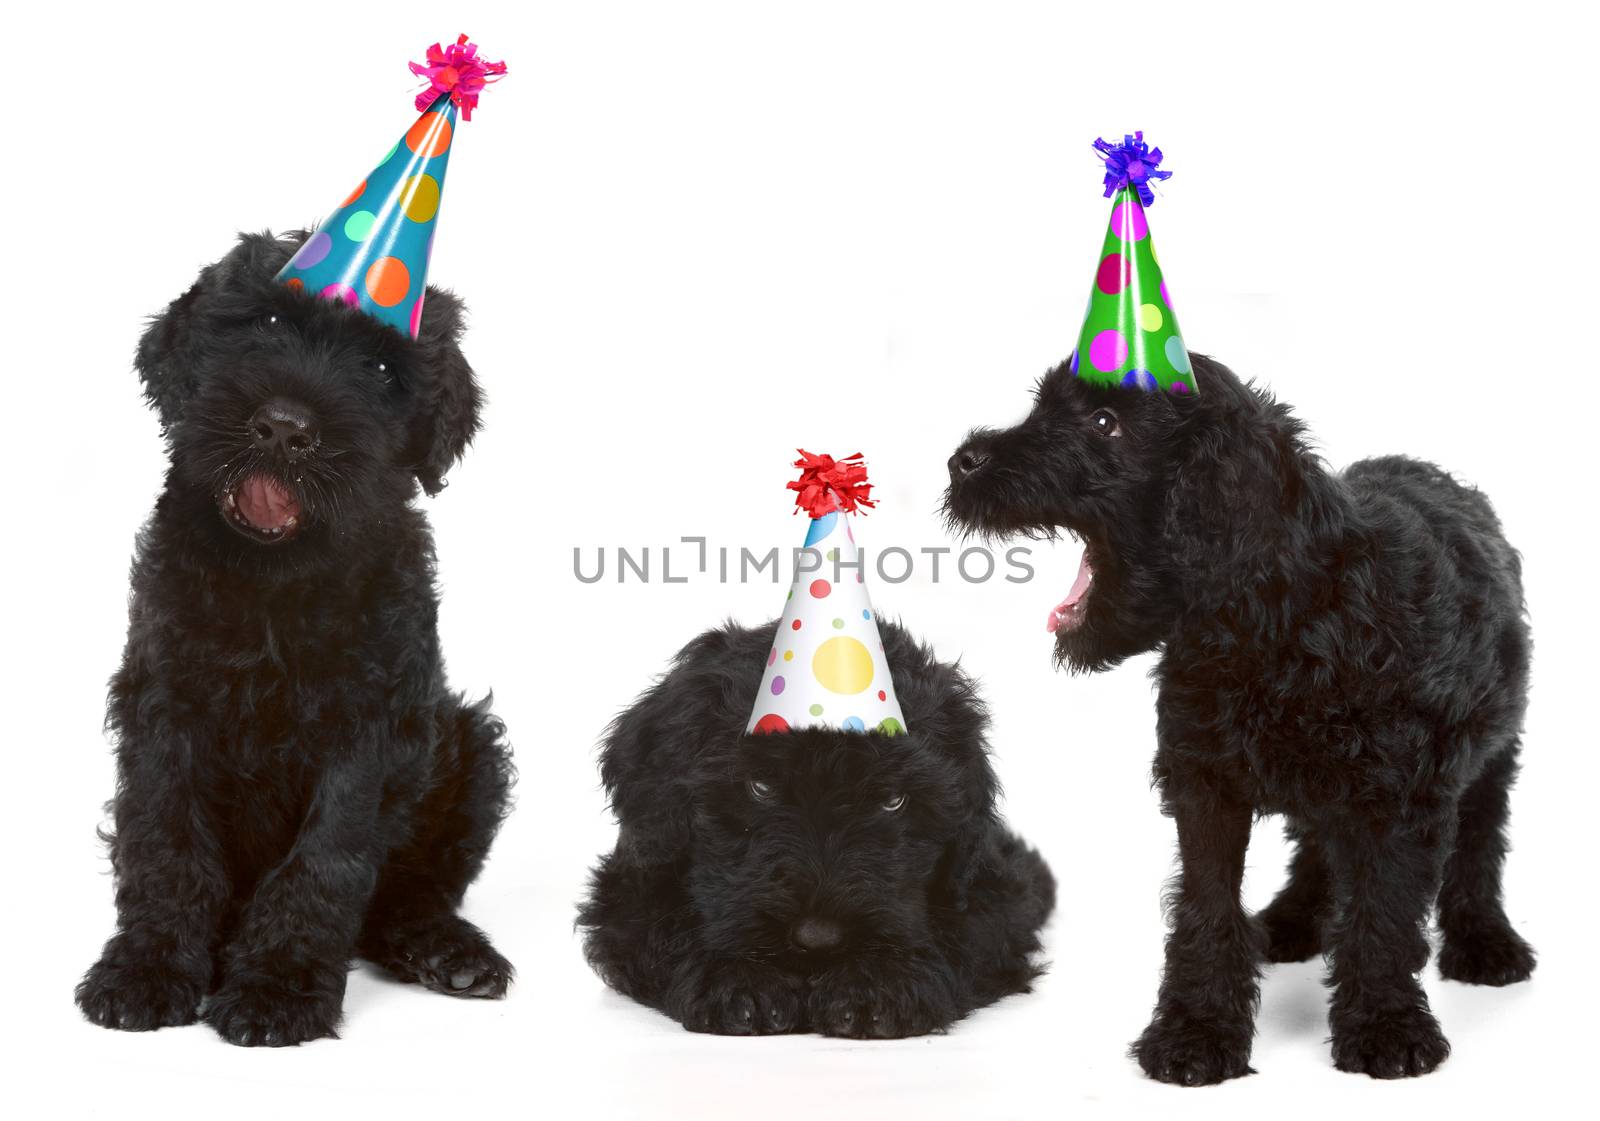 Silly Singing Black Russian Dog Terriers Wearing Birthday Hats